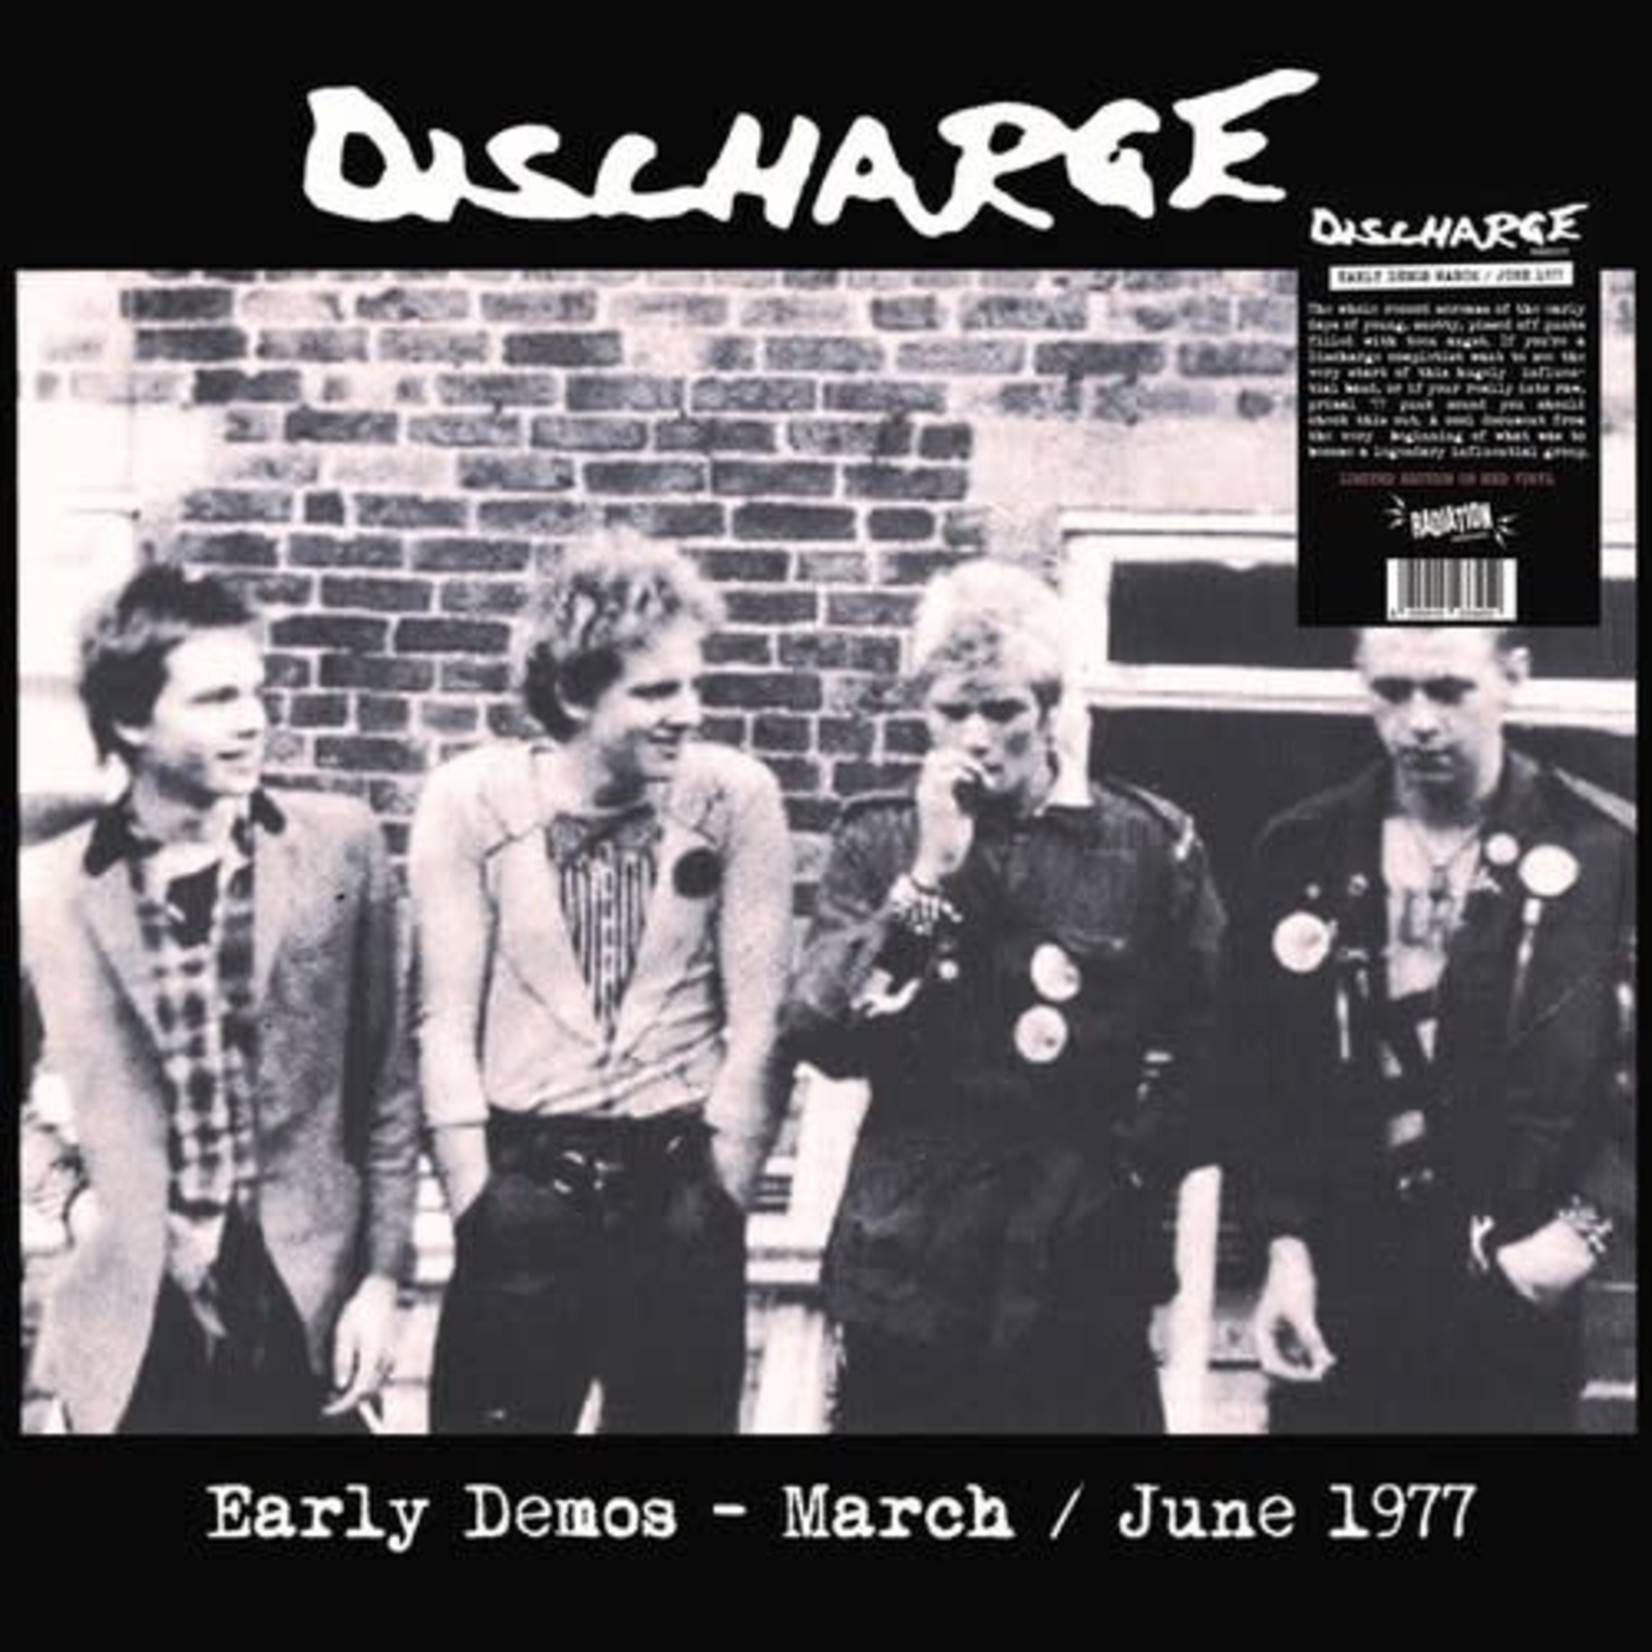 Radiation Discharge - Early Demos: March / June 1977 (LP)